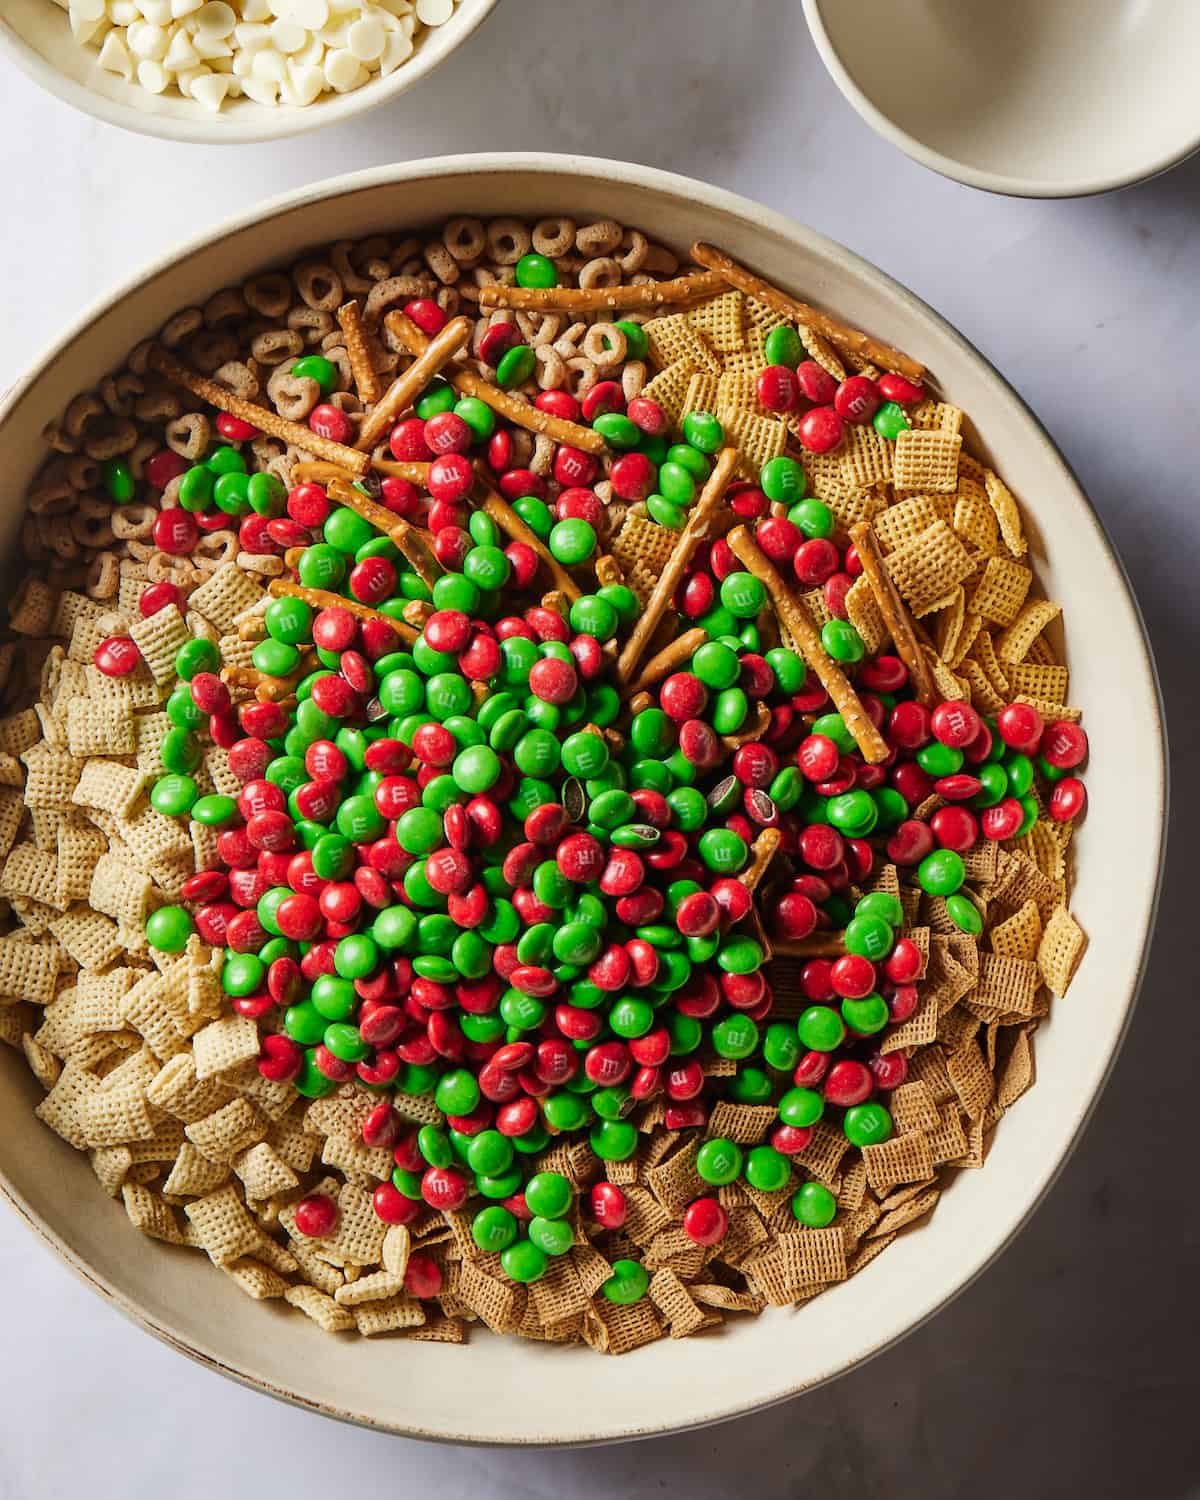 Christmas Chex Mix Recipe with M&Ms - Christmas Crack Chex Mix